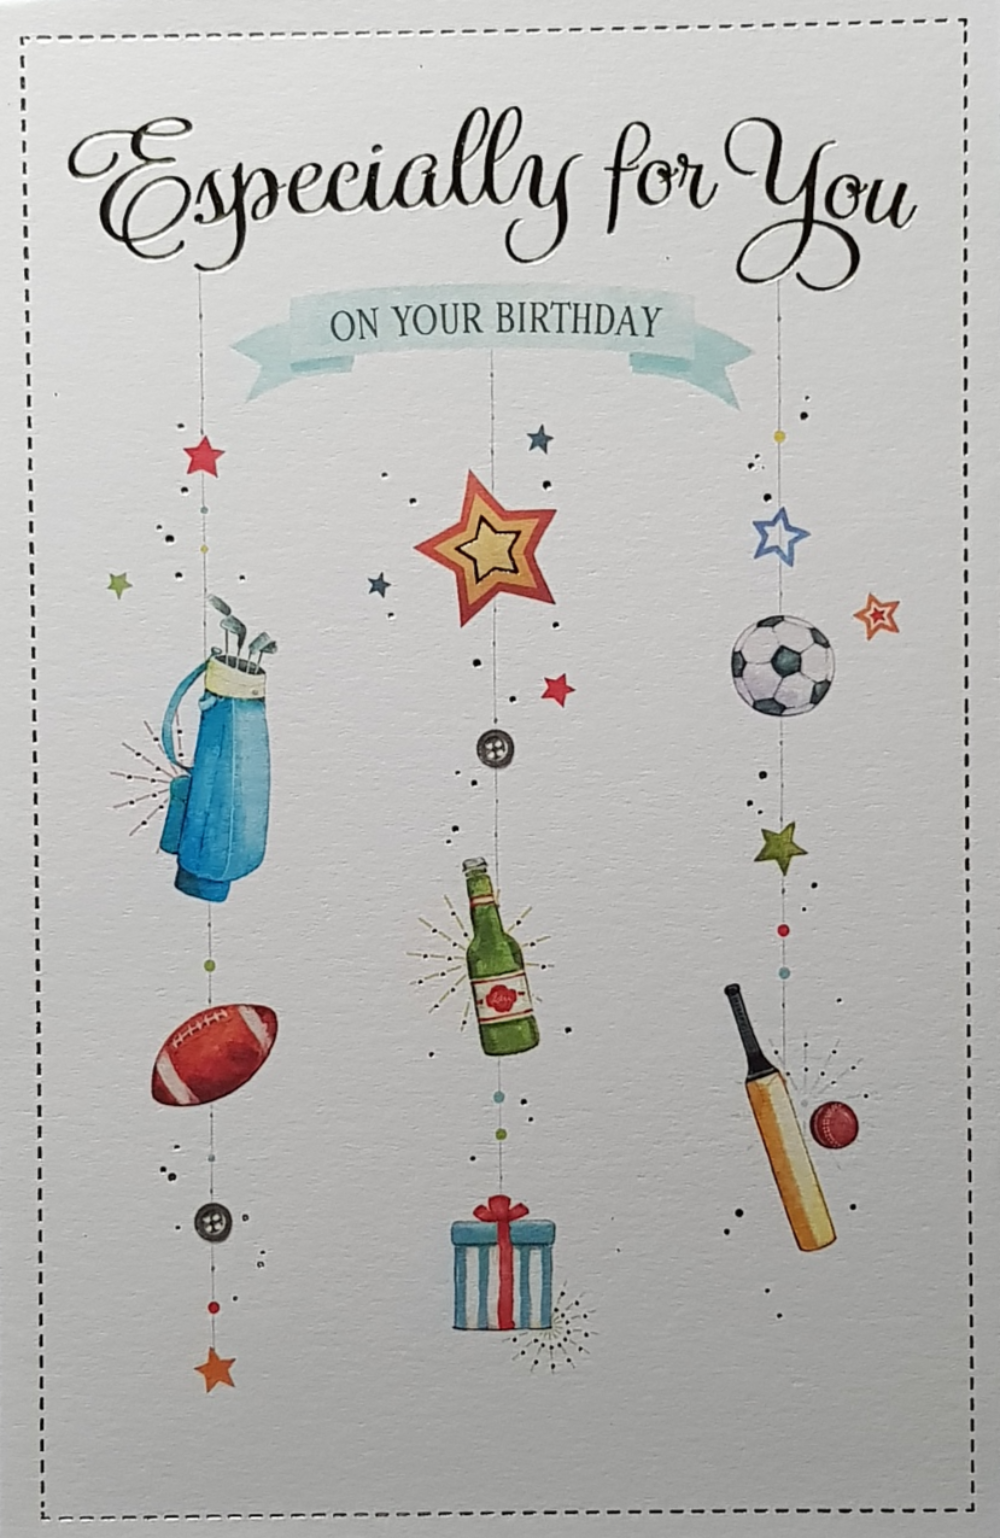 Birthday Card - General Male / Especially For You / Sport Items Displayed As A Garland